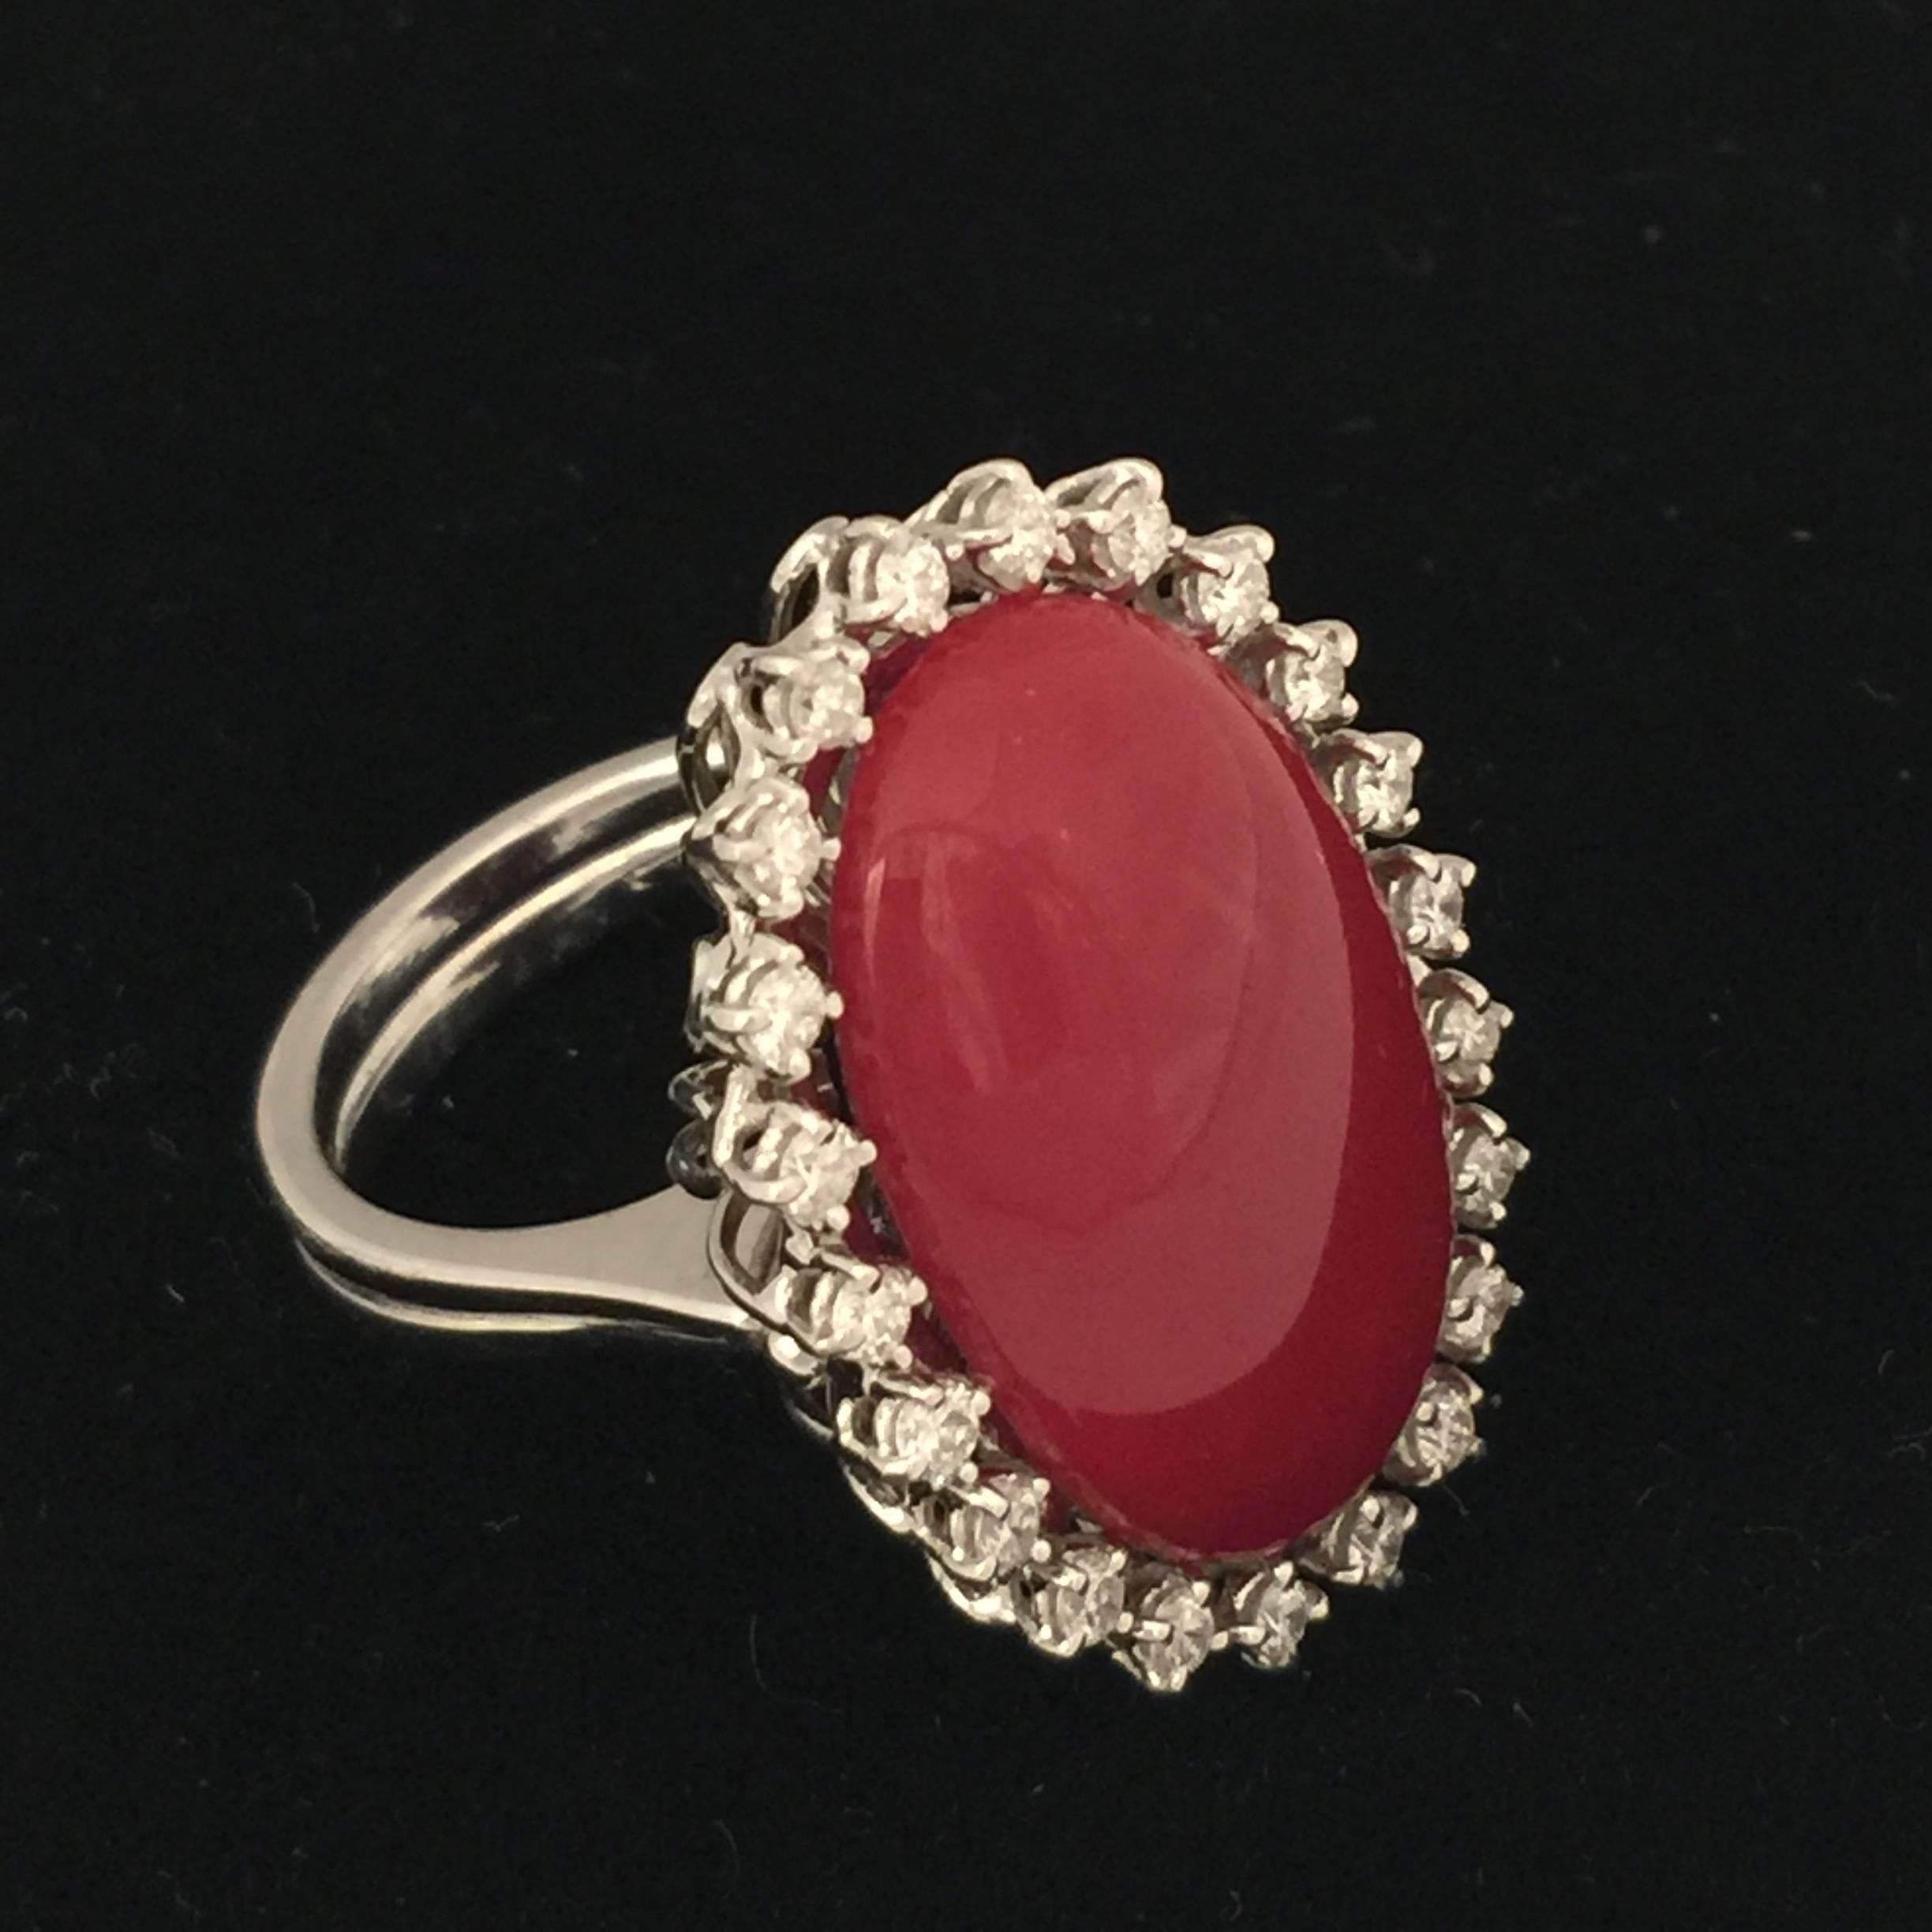 A stunning oxblood coral and diamond cocktail ring. 

The ring features a  beautiful deep red 